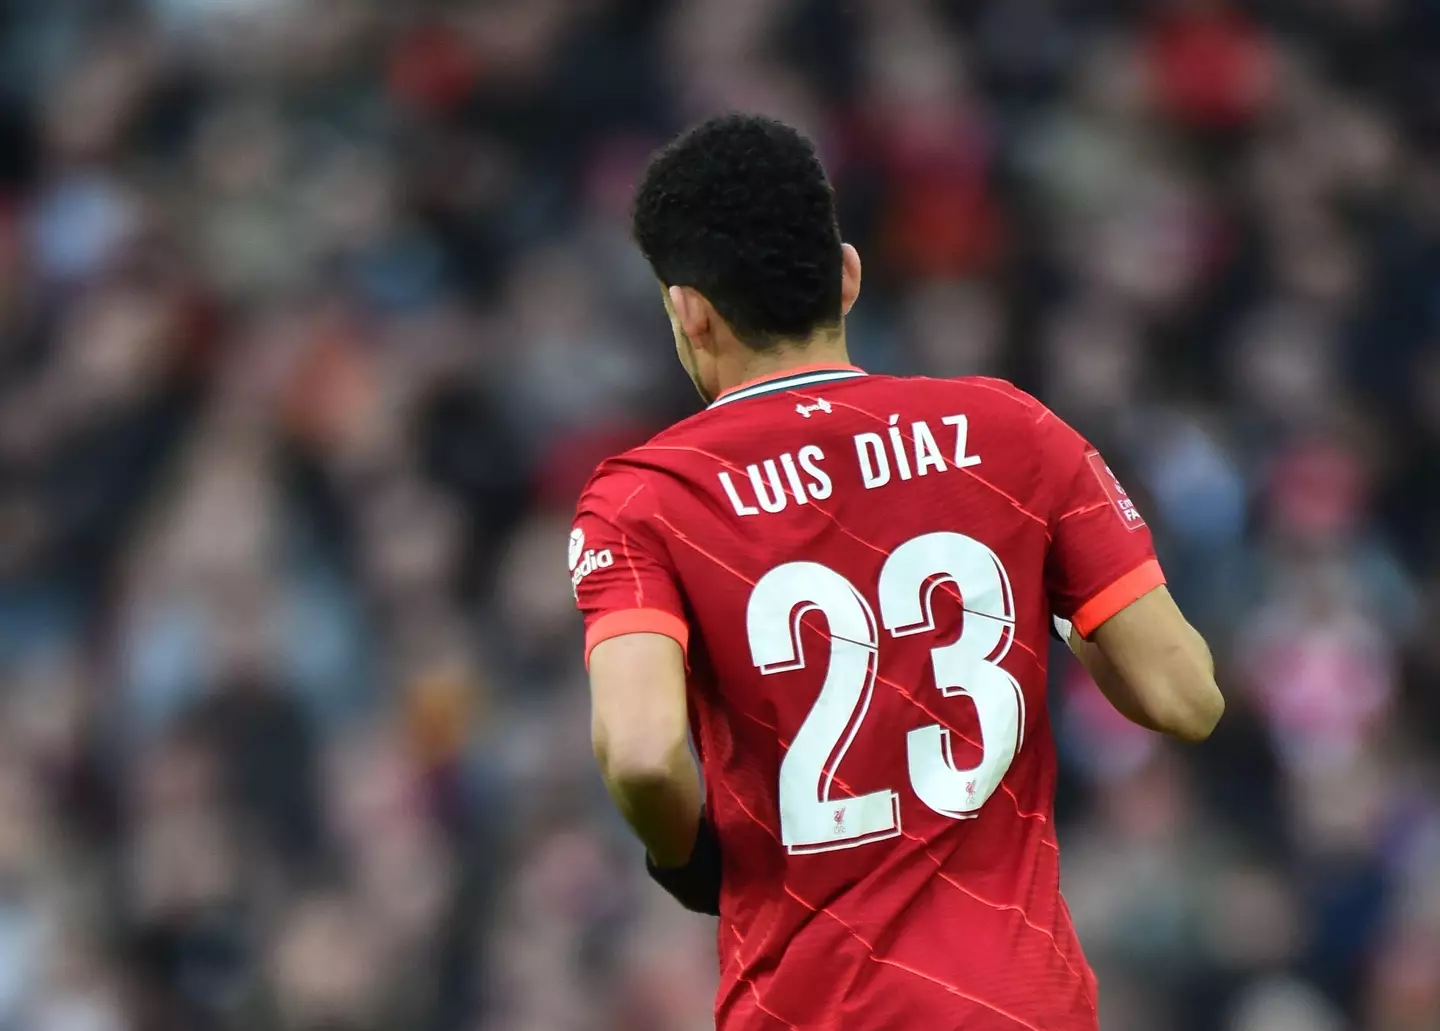 Diaz helped set up a goal on his debut for Liverpool (Image: Alamy)